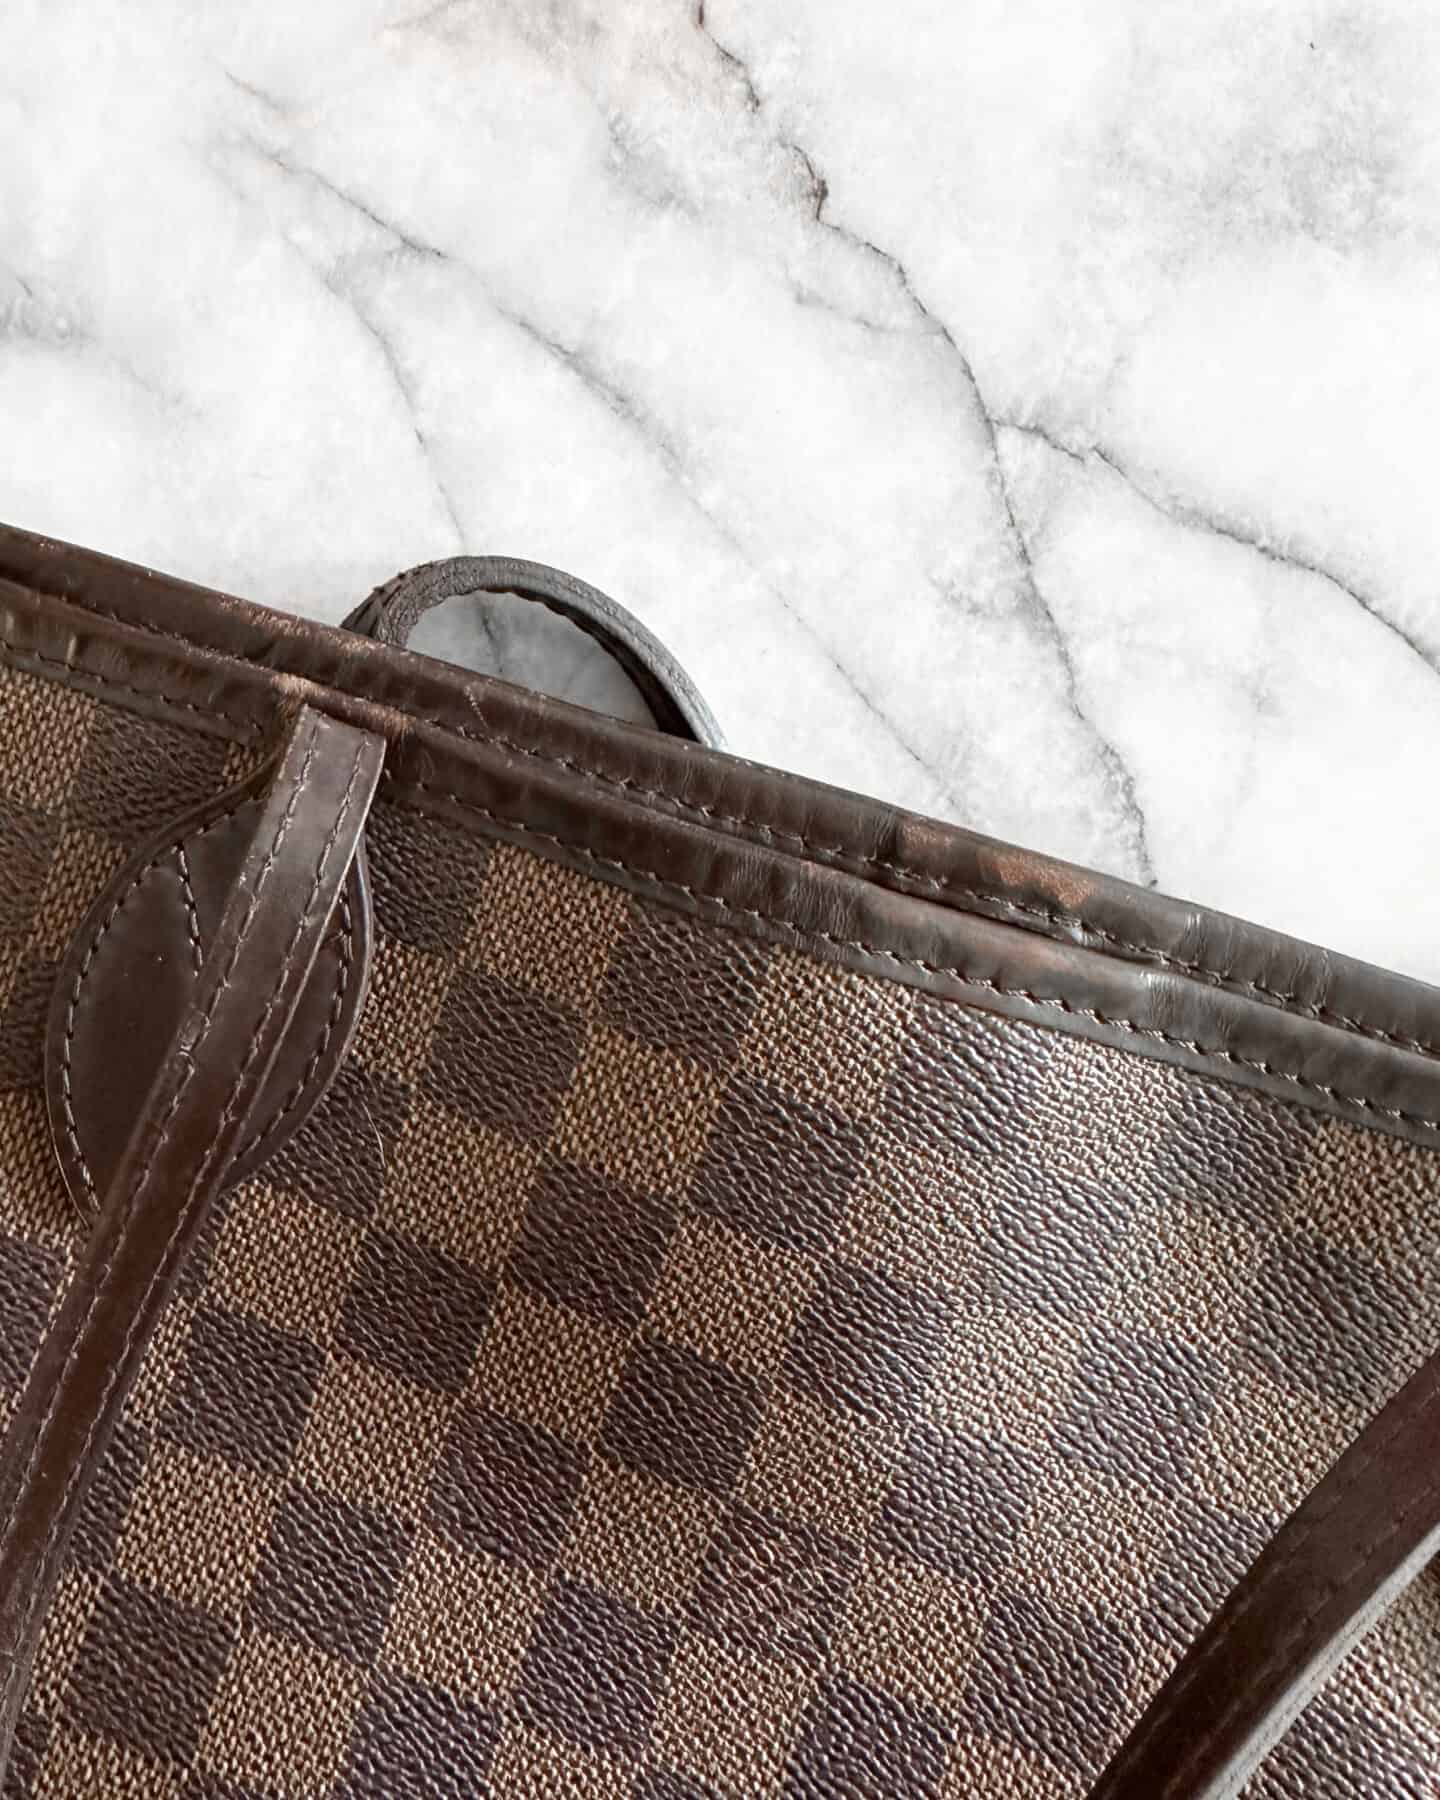 Wear and Tear of the Louis Vuitton Neverfull after 10 years